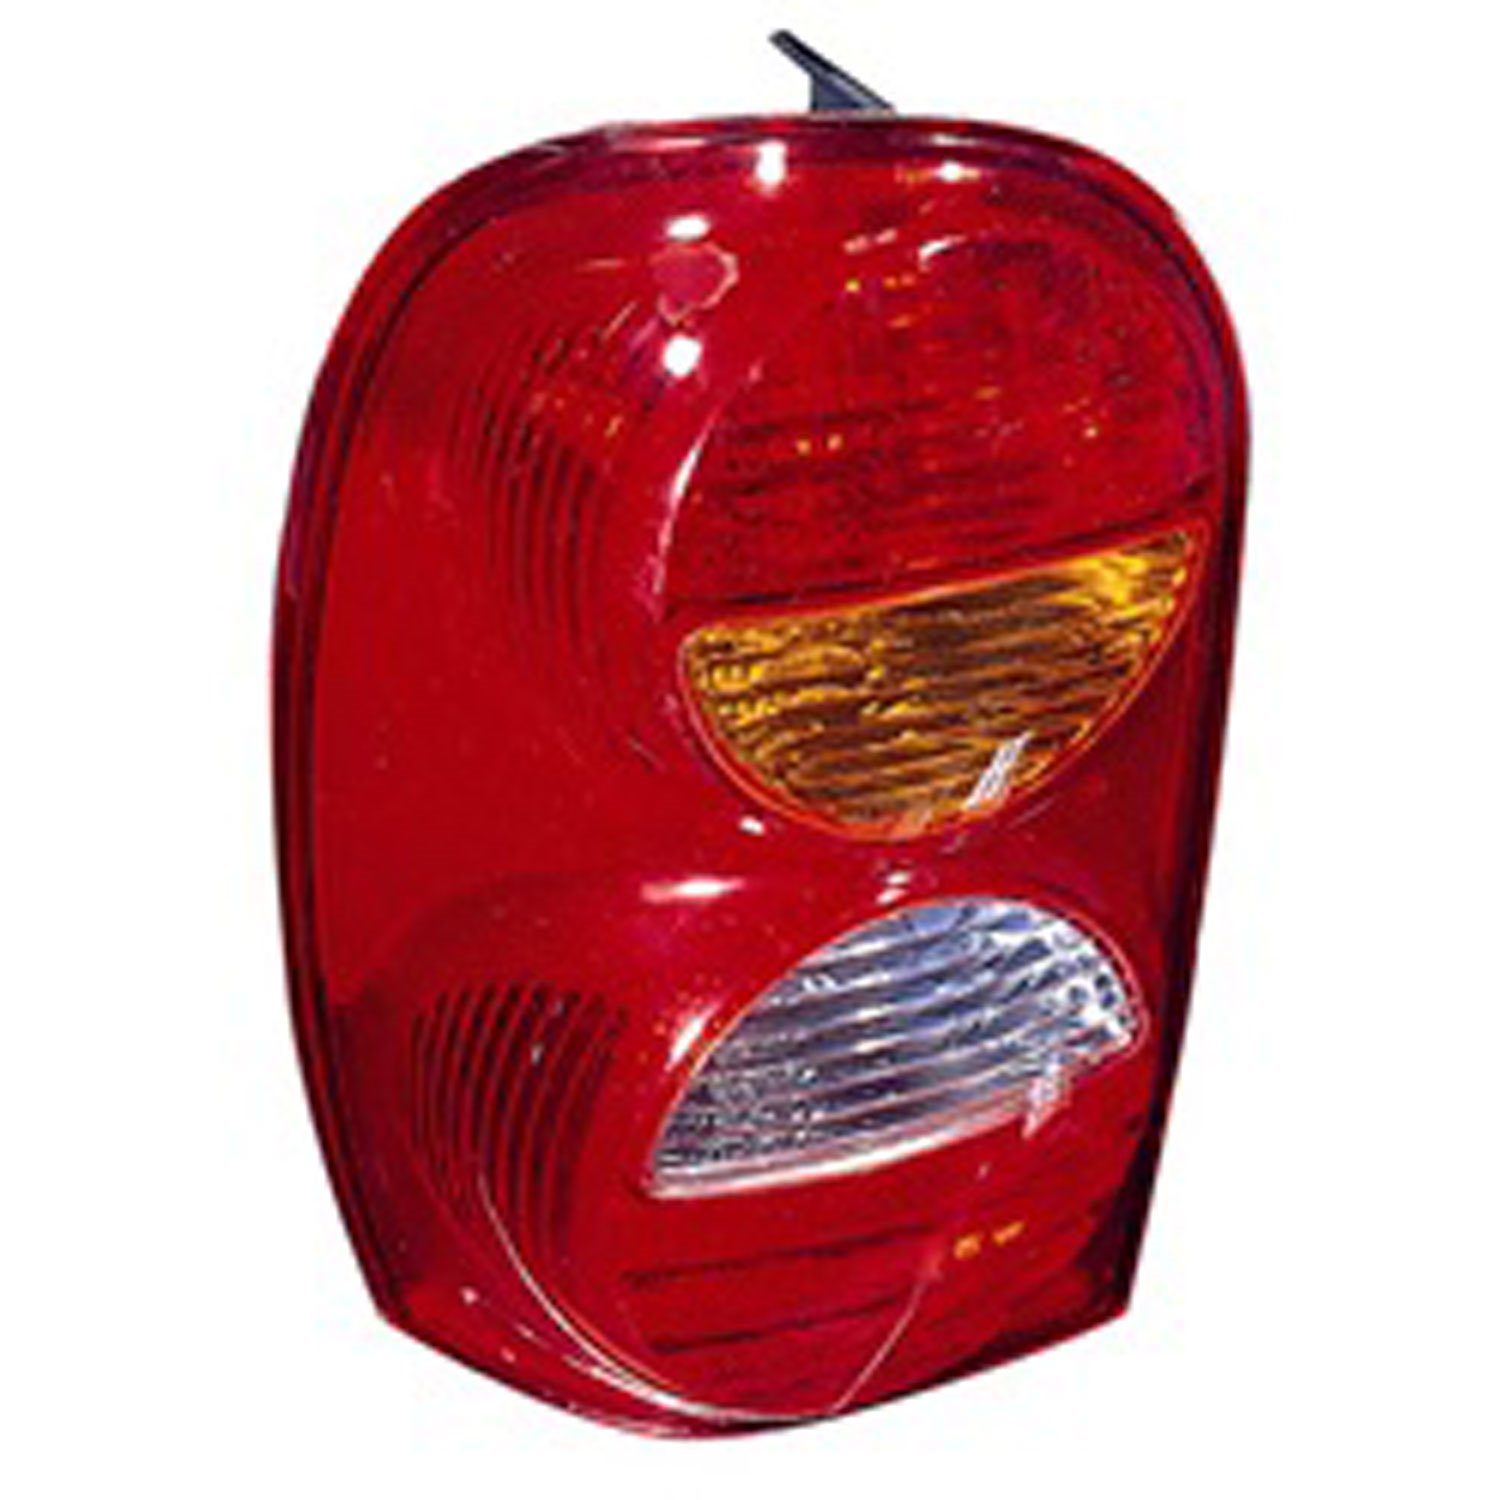 Replacement tail light assembly from Omix-ADA, Fits right side of 02-04 Jeep Liberty KJ